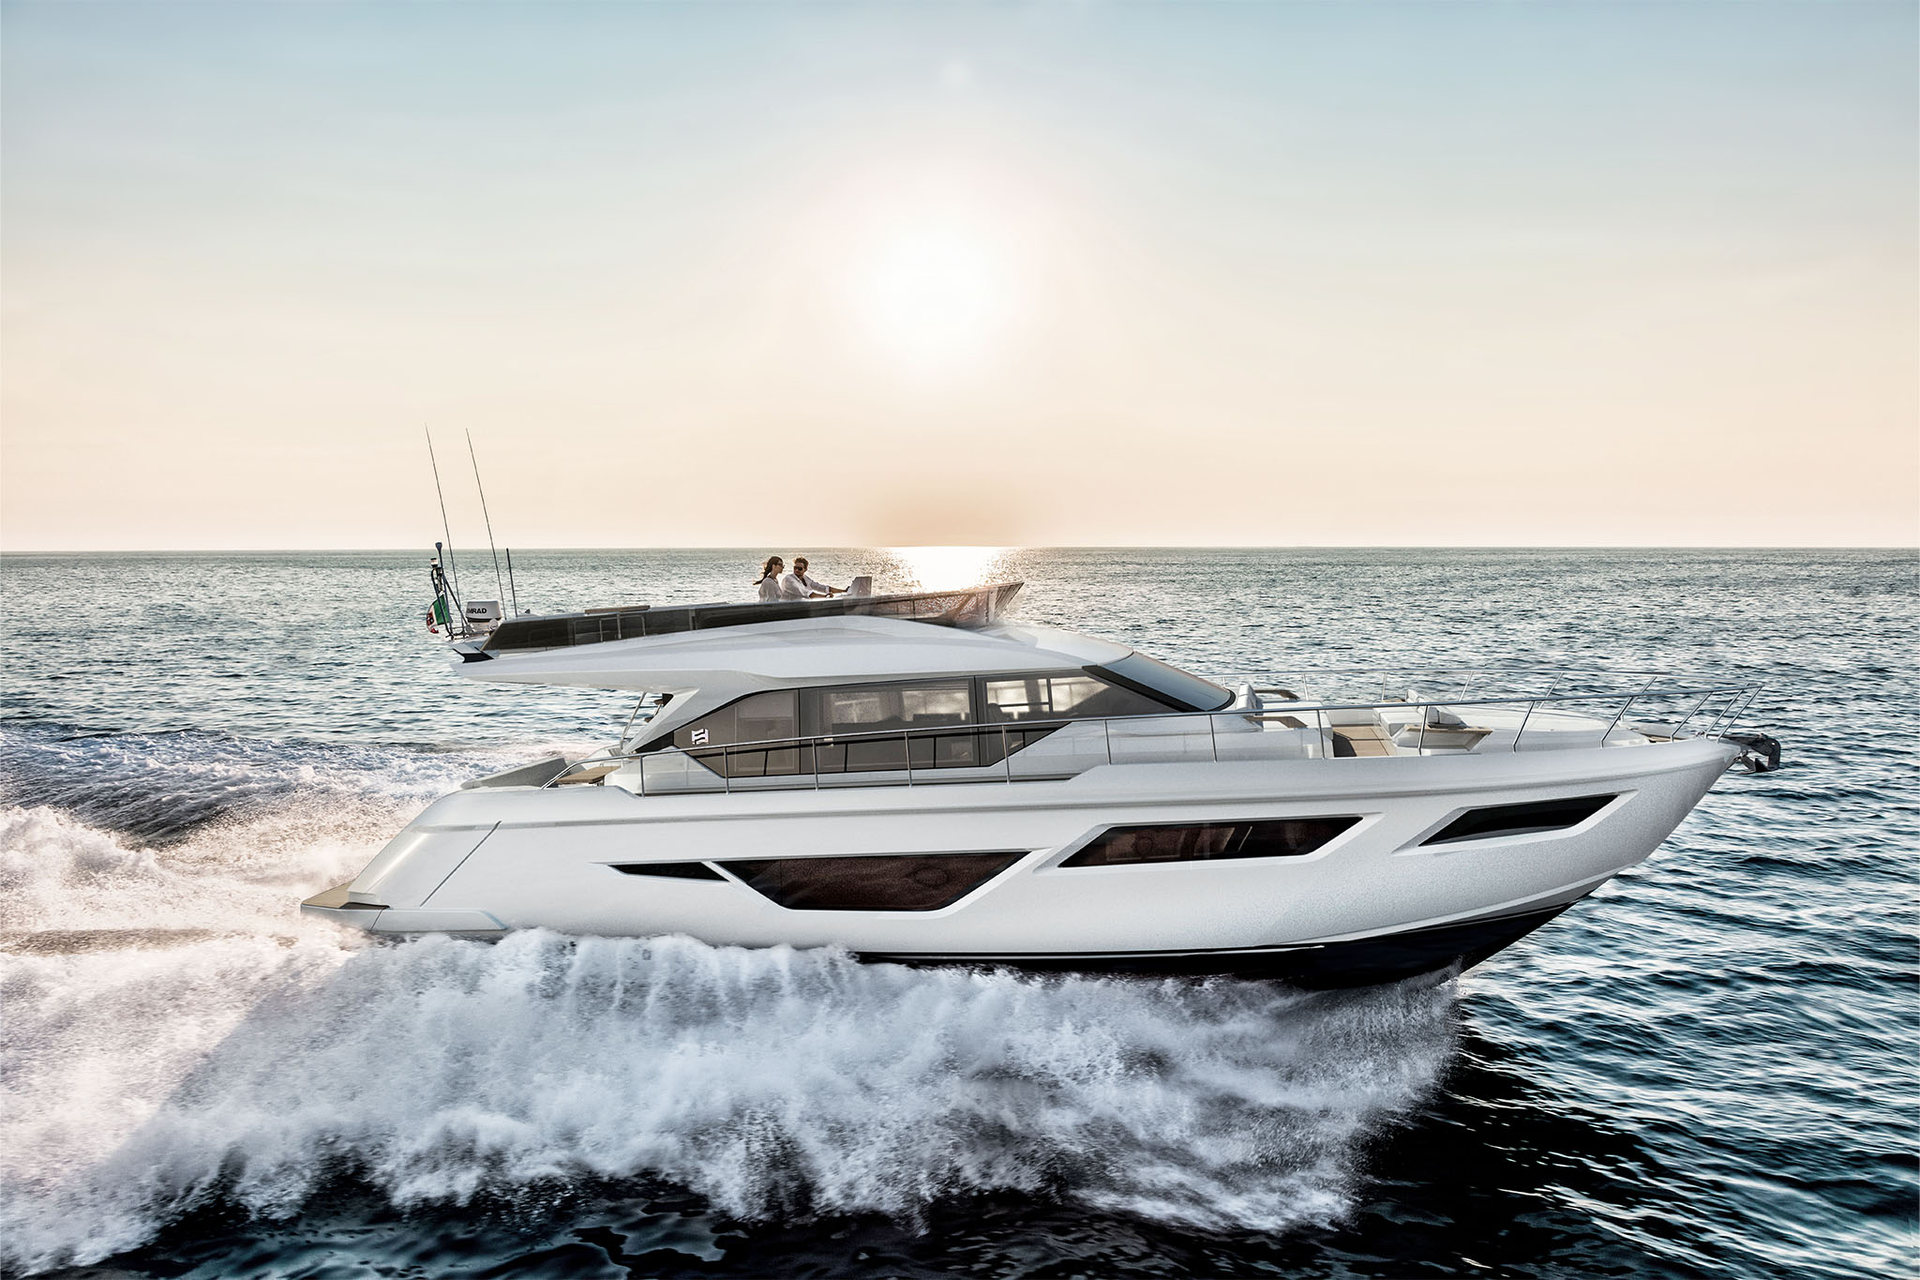 360 VR Virtual Tours of the Ferretti Yachts 580